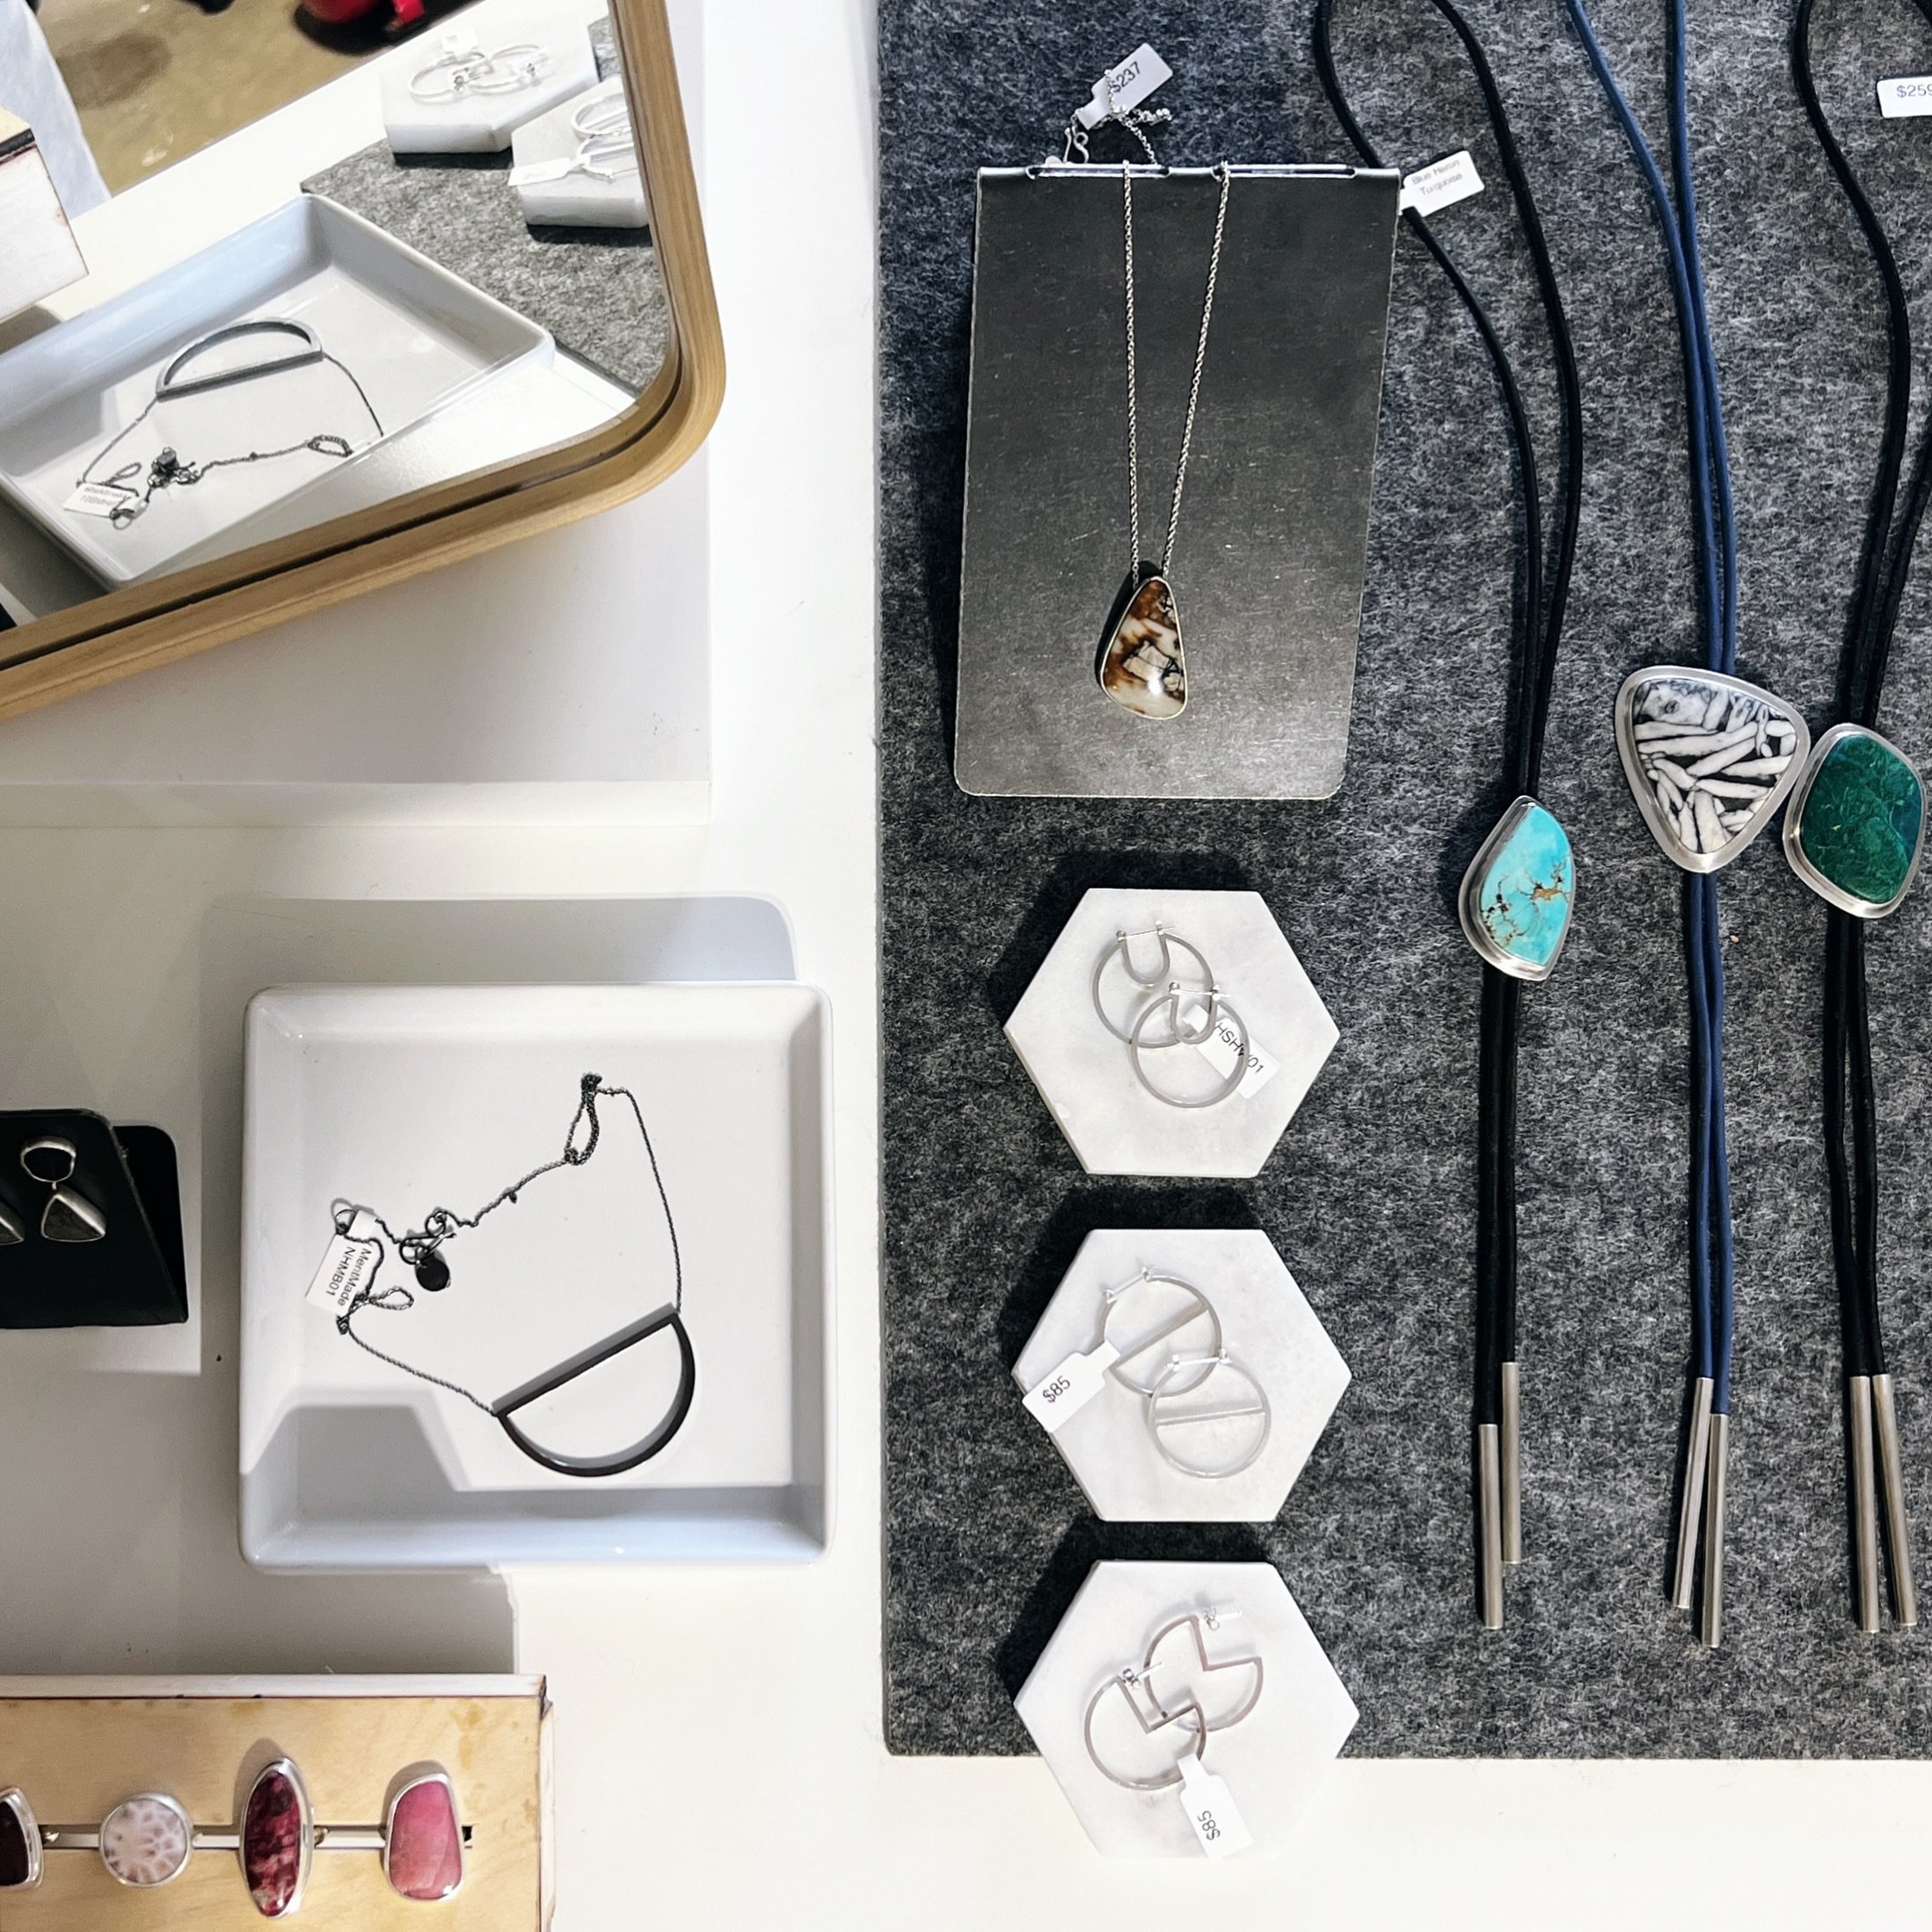 Join us May 22nd for our next mini workshop all about pricing and selling your work! We only have 2 seats left!

If you are a maker interested in selling your handmade jewelry, or if you already do but want some expert knowledge, this is the workshop